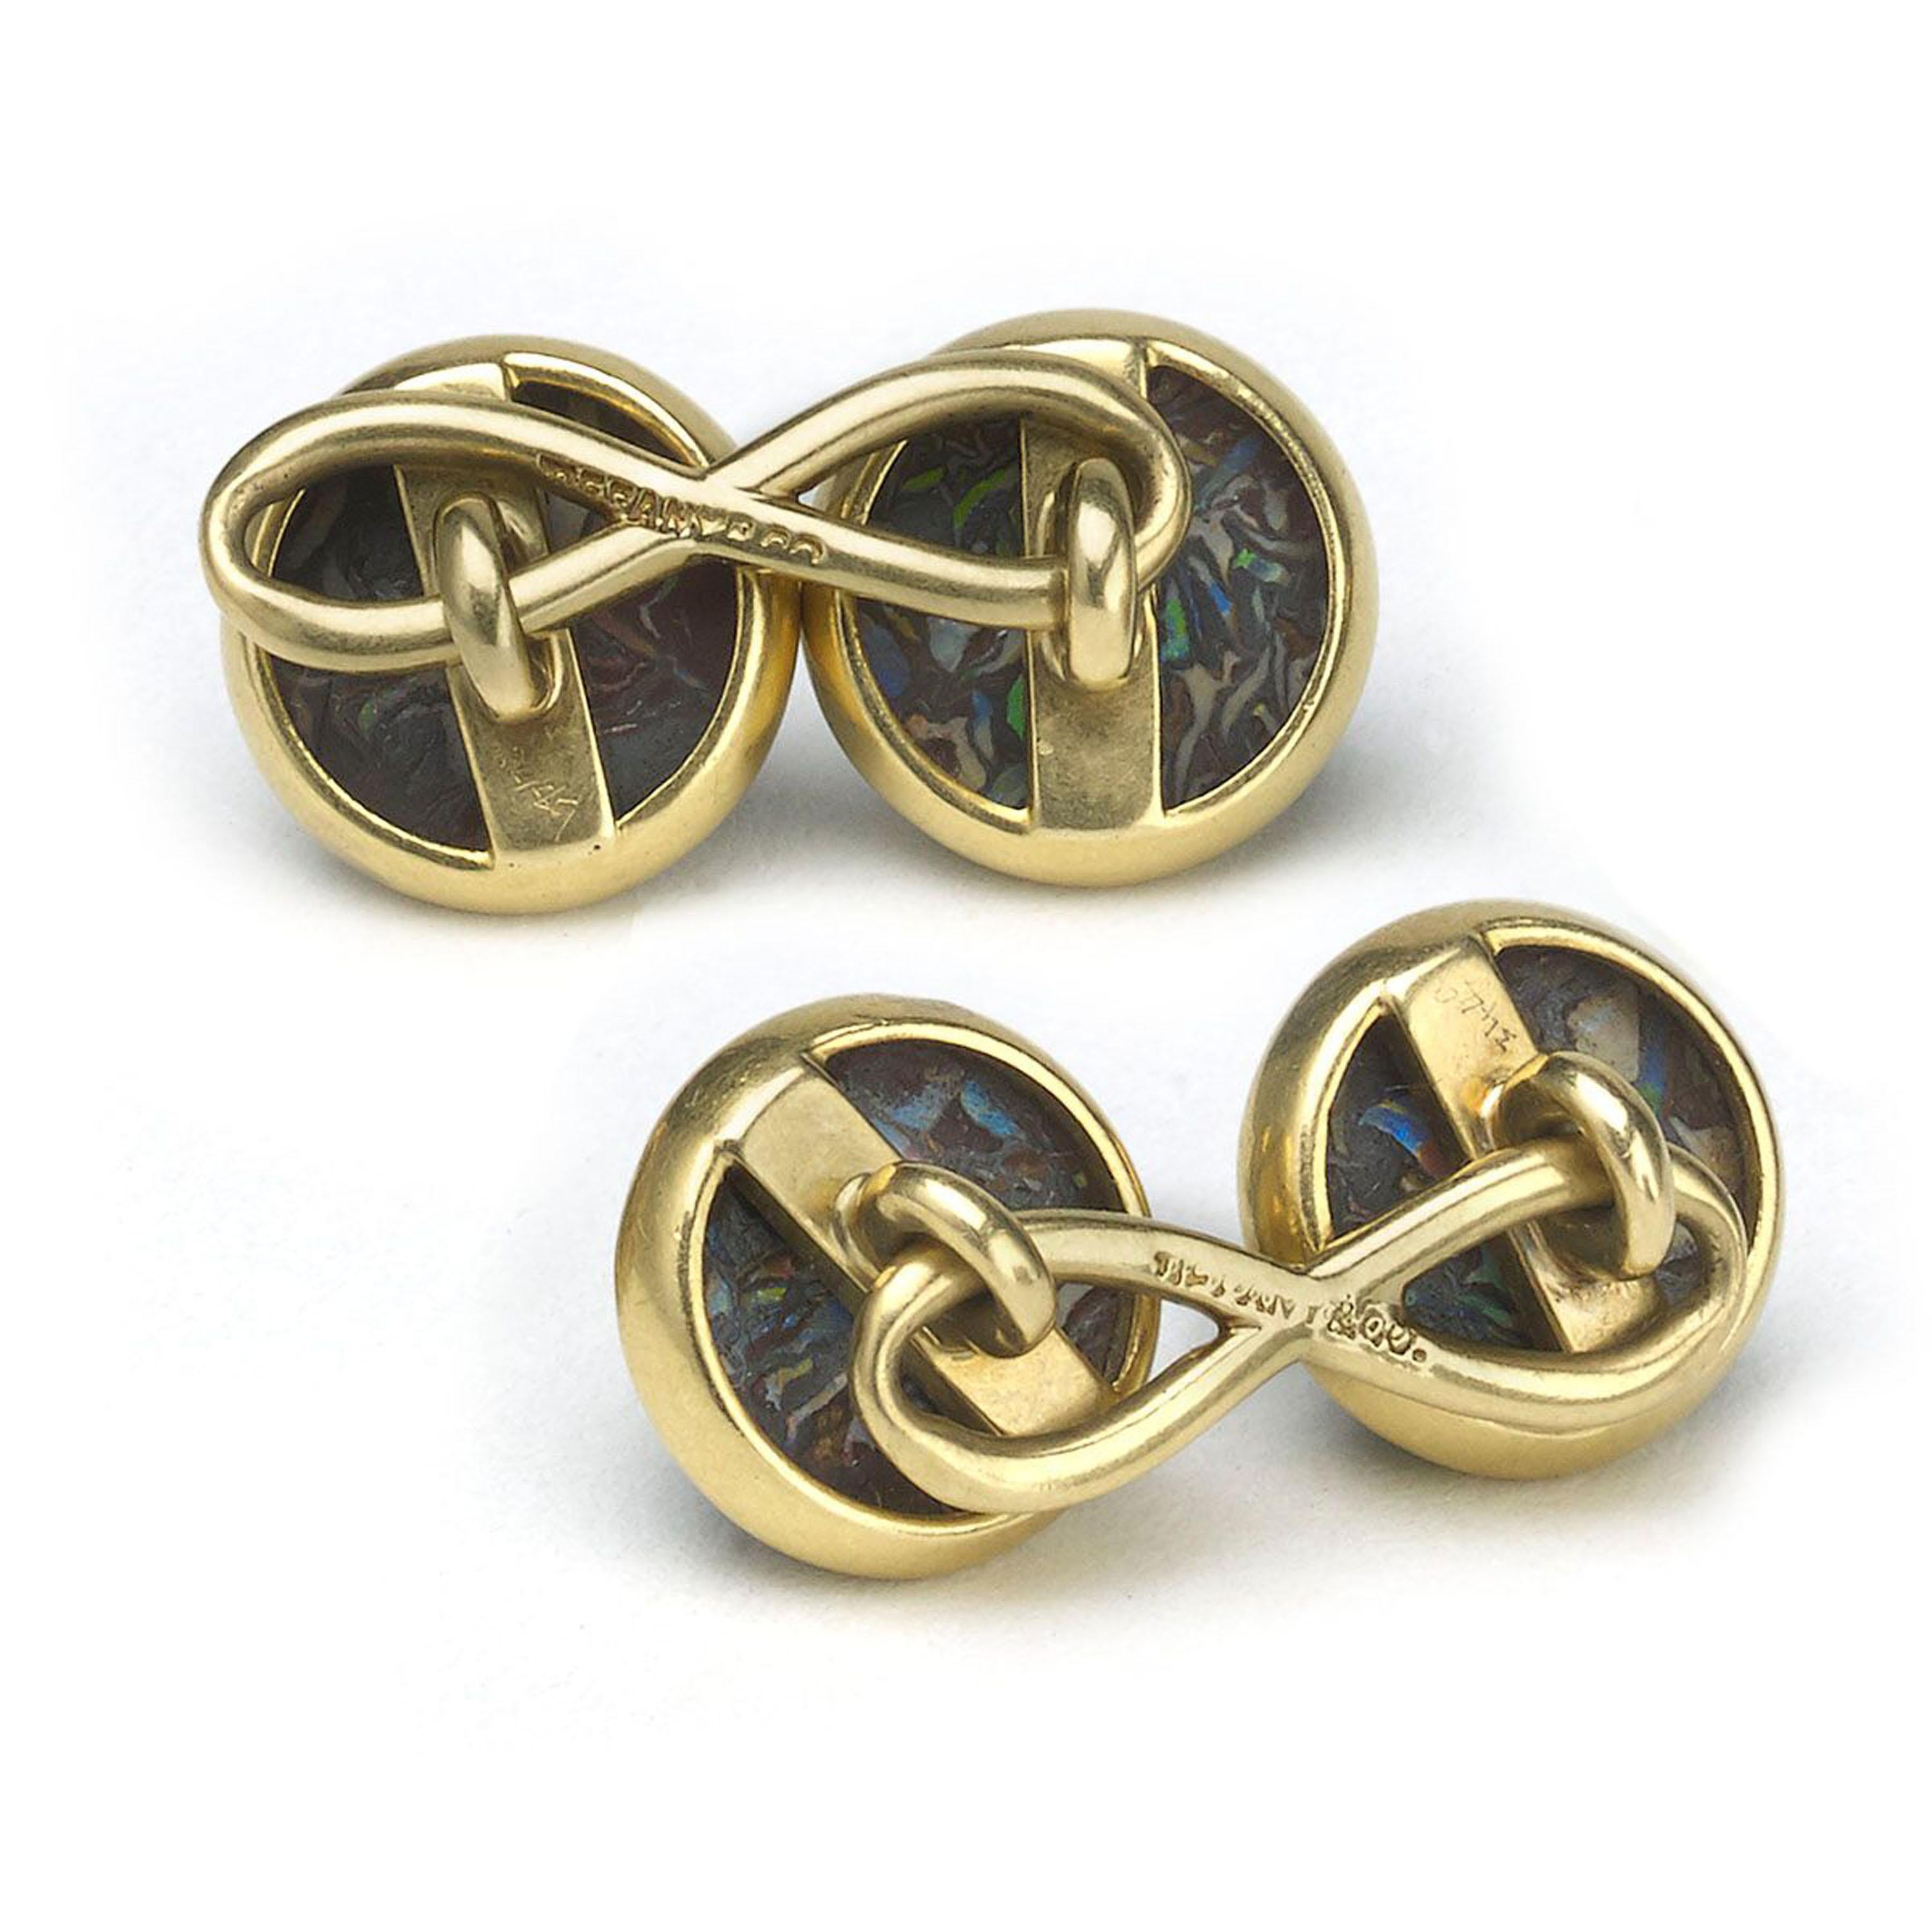 A pair of antique Tiffany & Co. cabochon boulder opal cufflinks, each set with a circular domed boulder opal matrix, mounted in gold, with figure-of-eight links, signed 